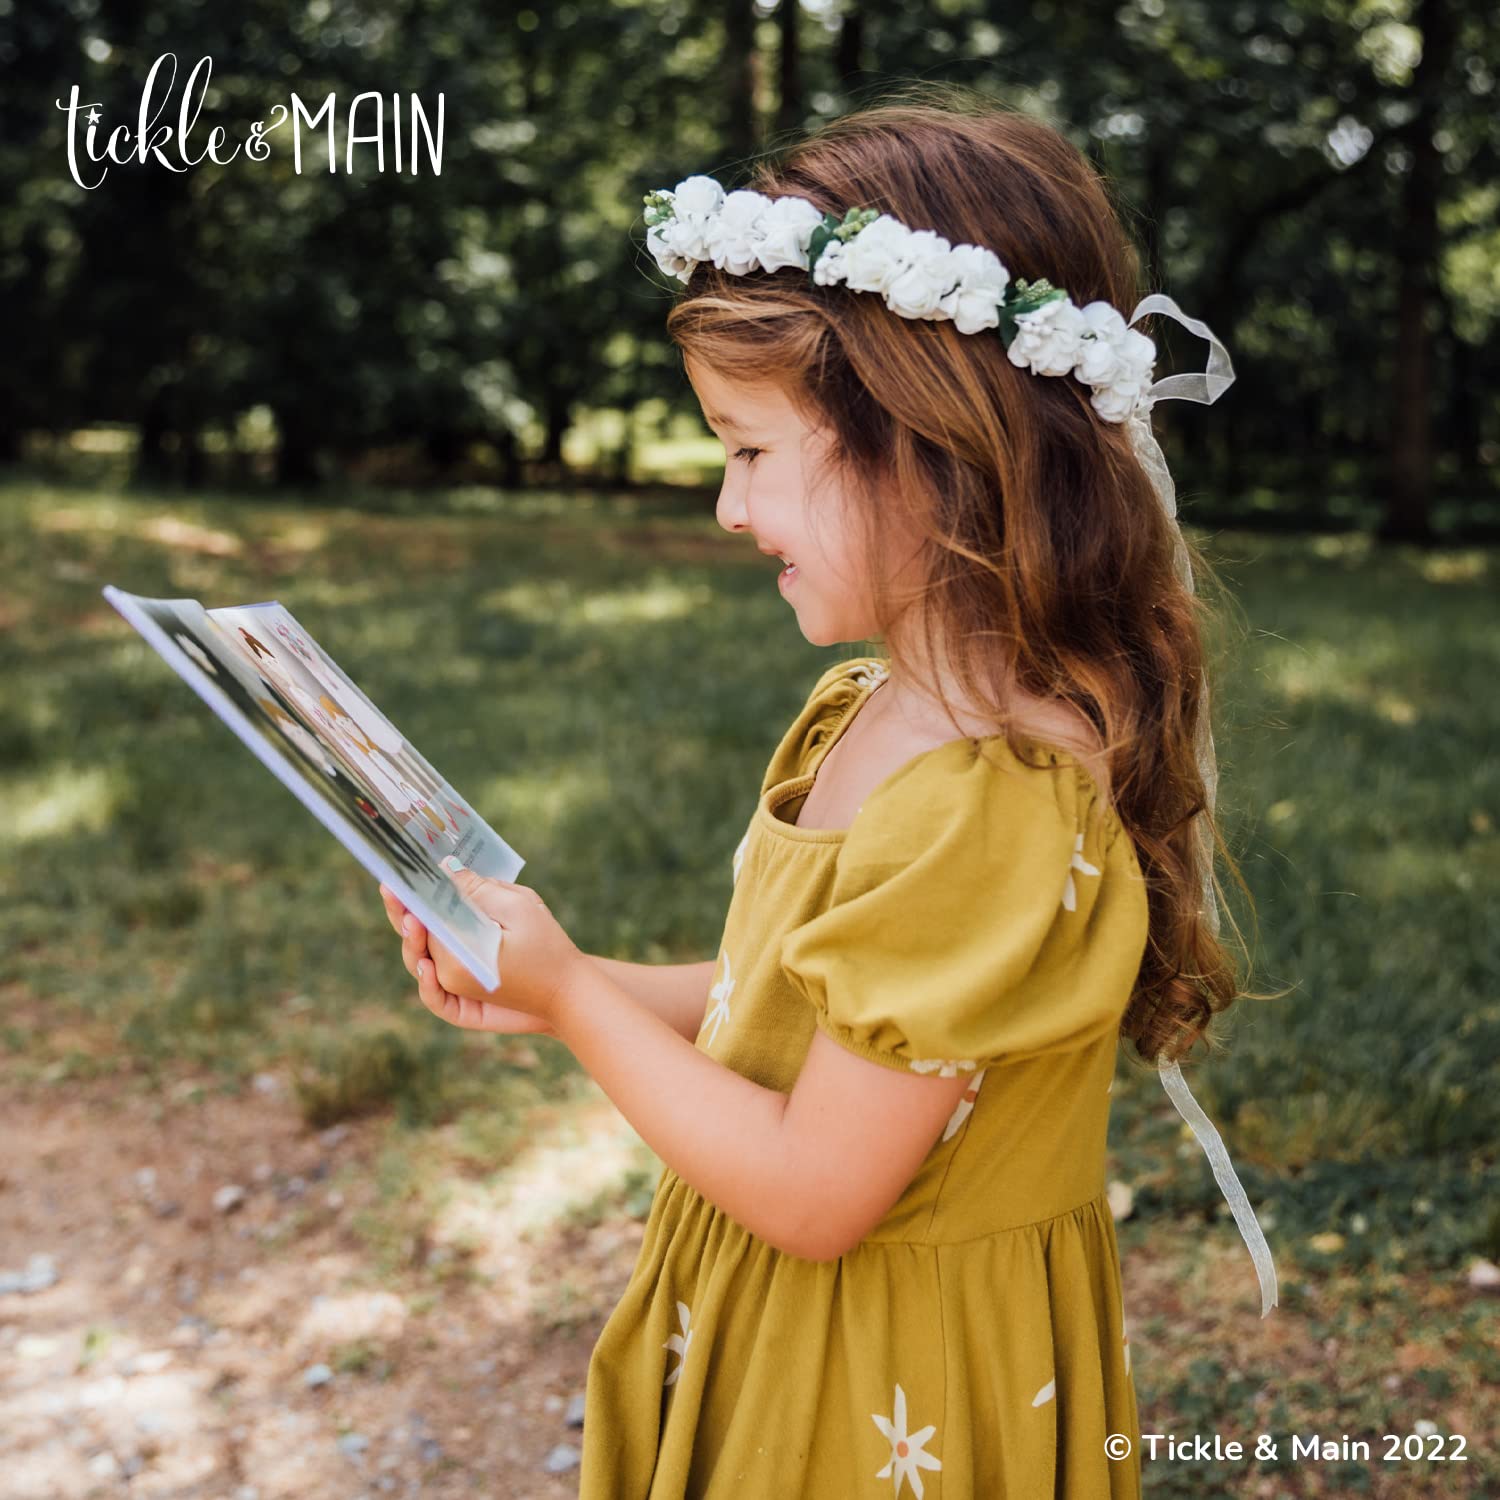 Tickle & Main, Flower Girl Gift Set- Book with Floral Crown Headband Headpiece in Adorable Gift Box - I've Been Crowned a Flower Girl!